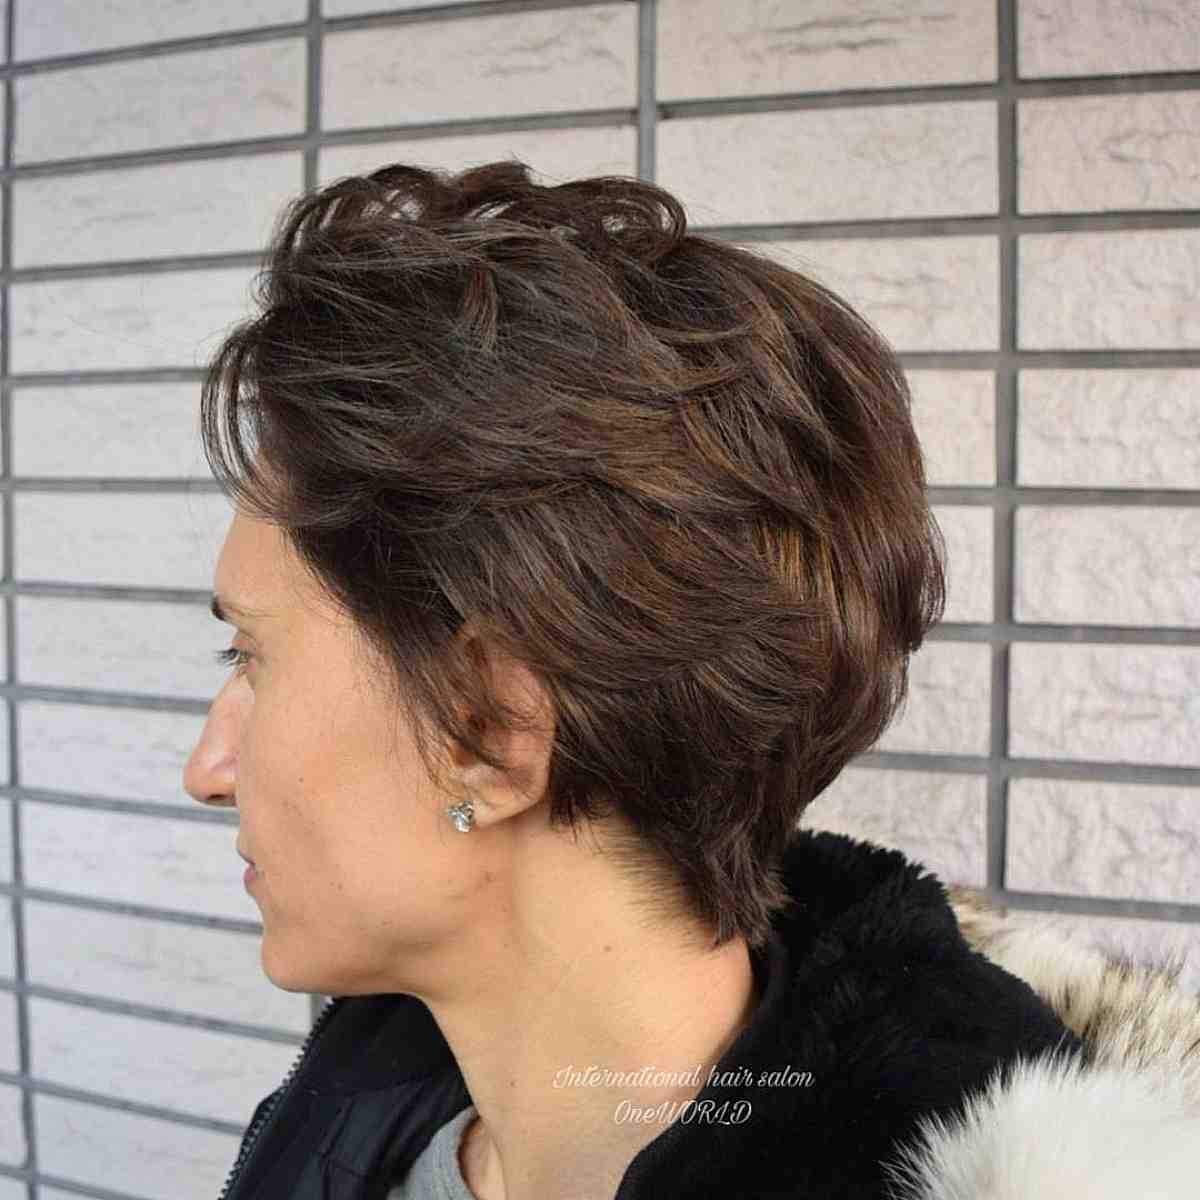 Short Layered Swept Back Style on a Feathered Pixie